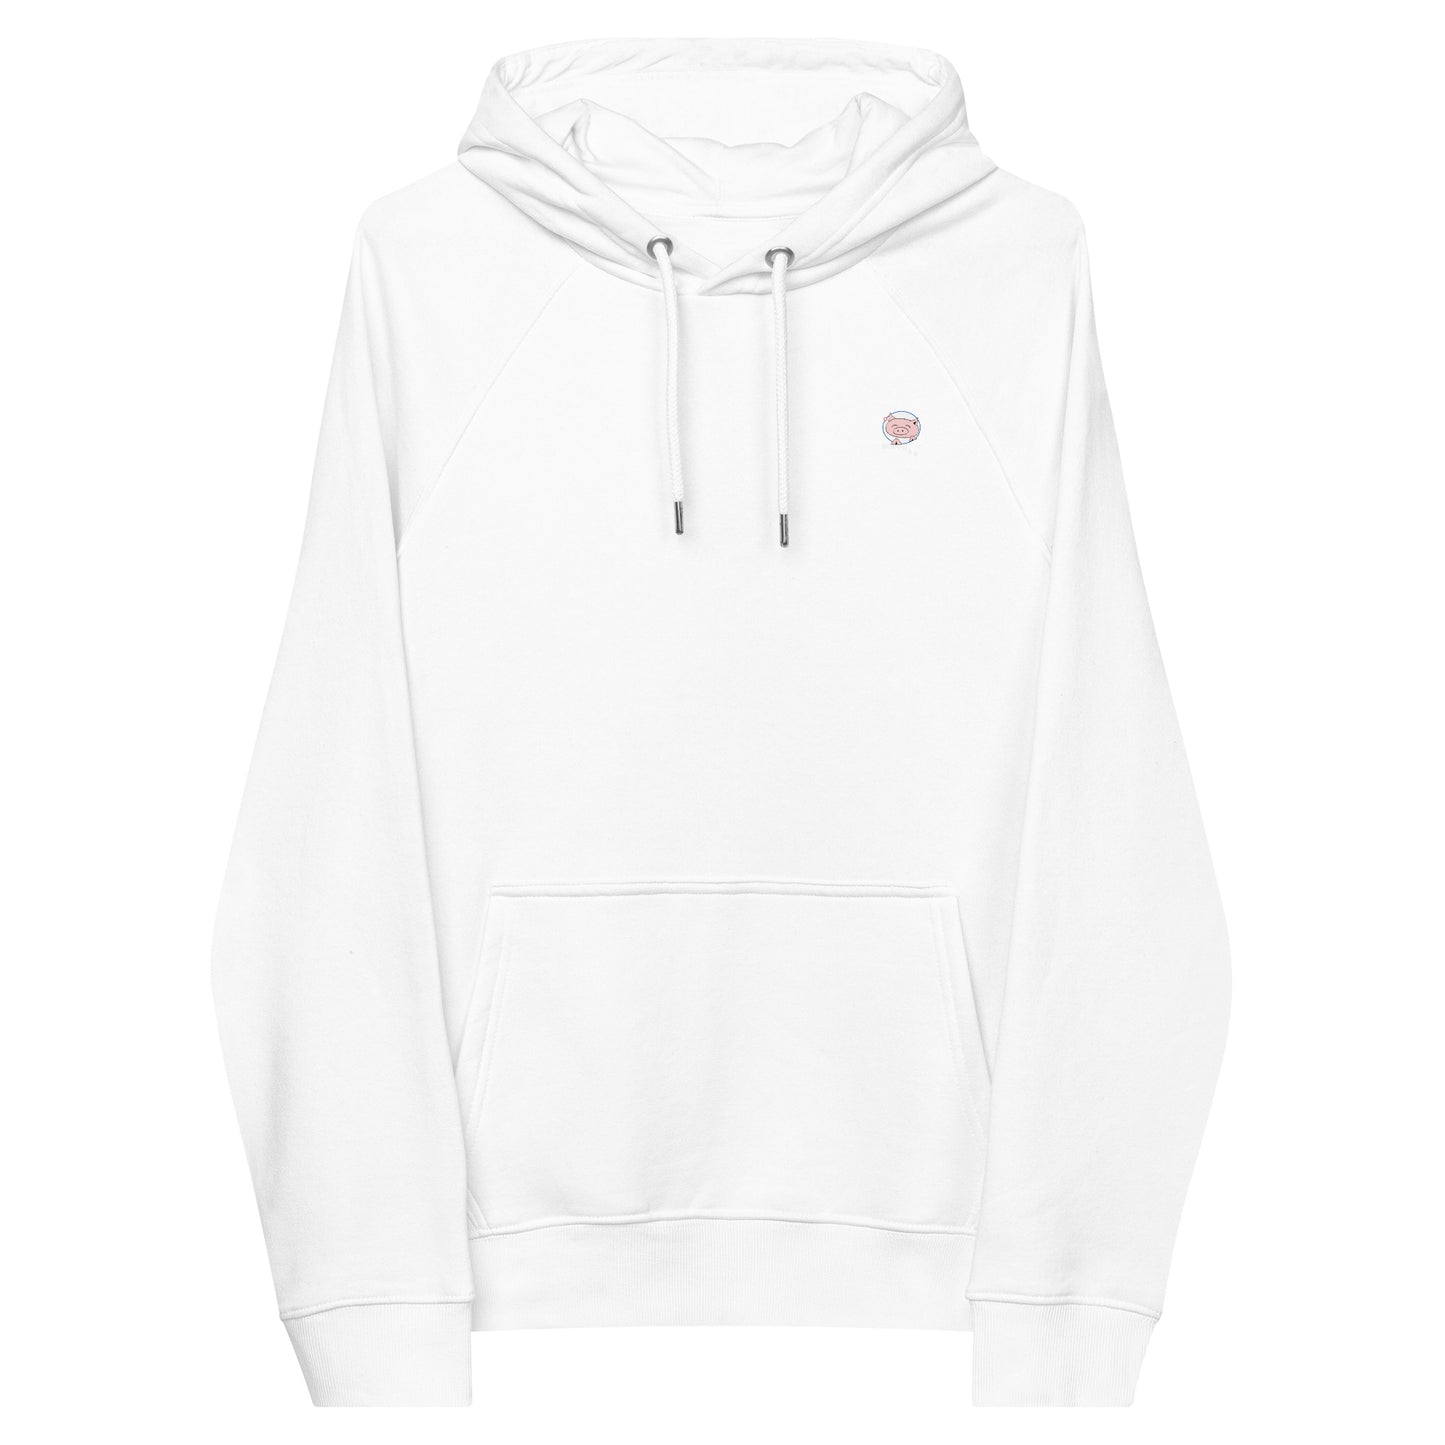 Extra soft white hoodie with small Mwohae logo on the left chest